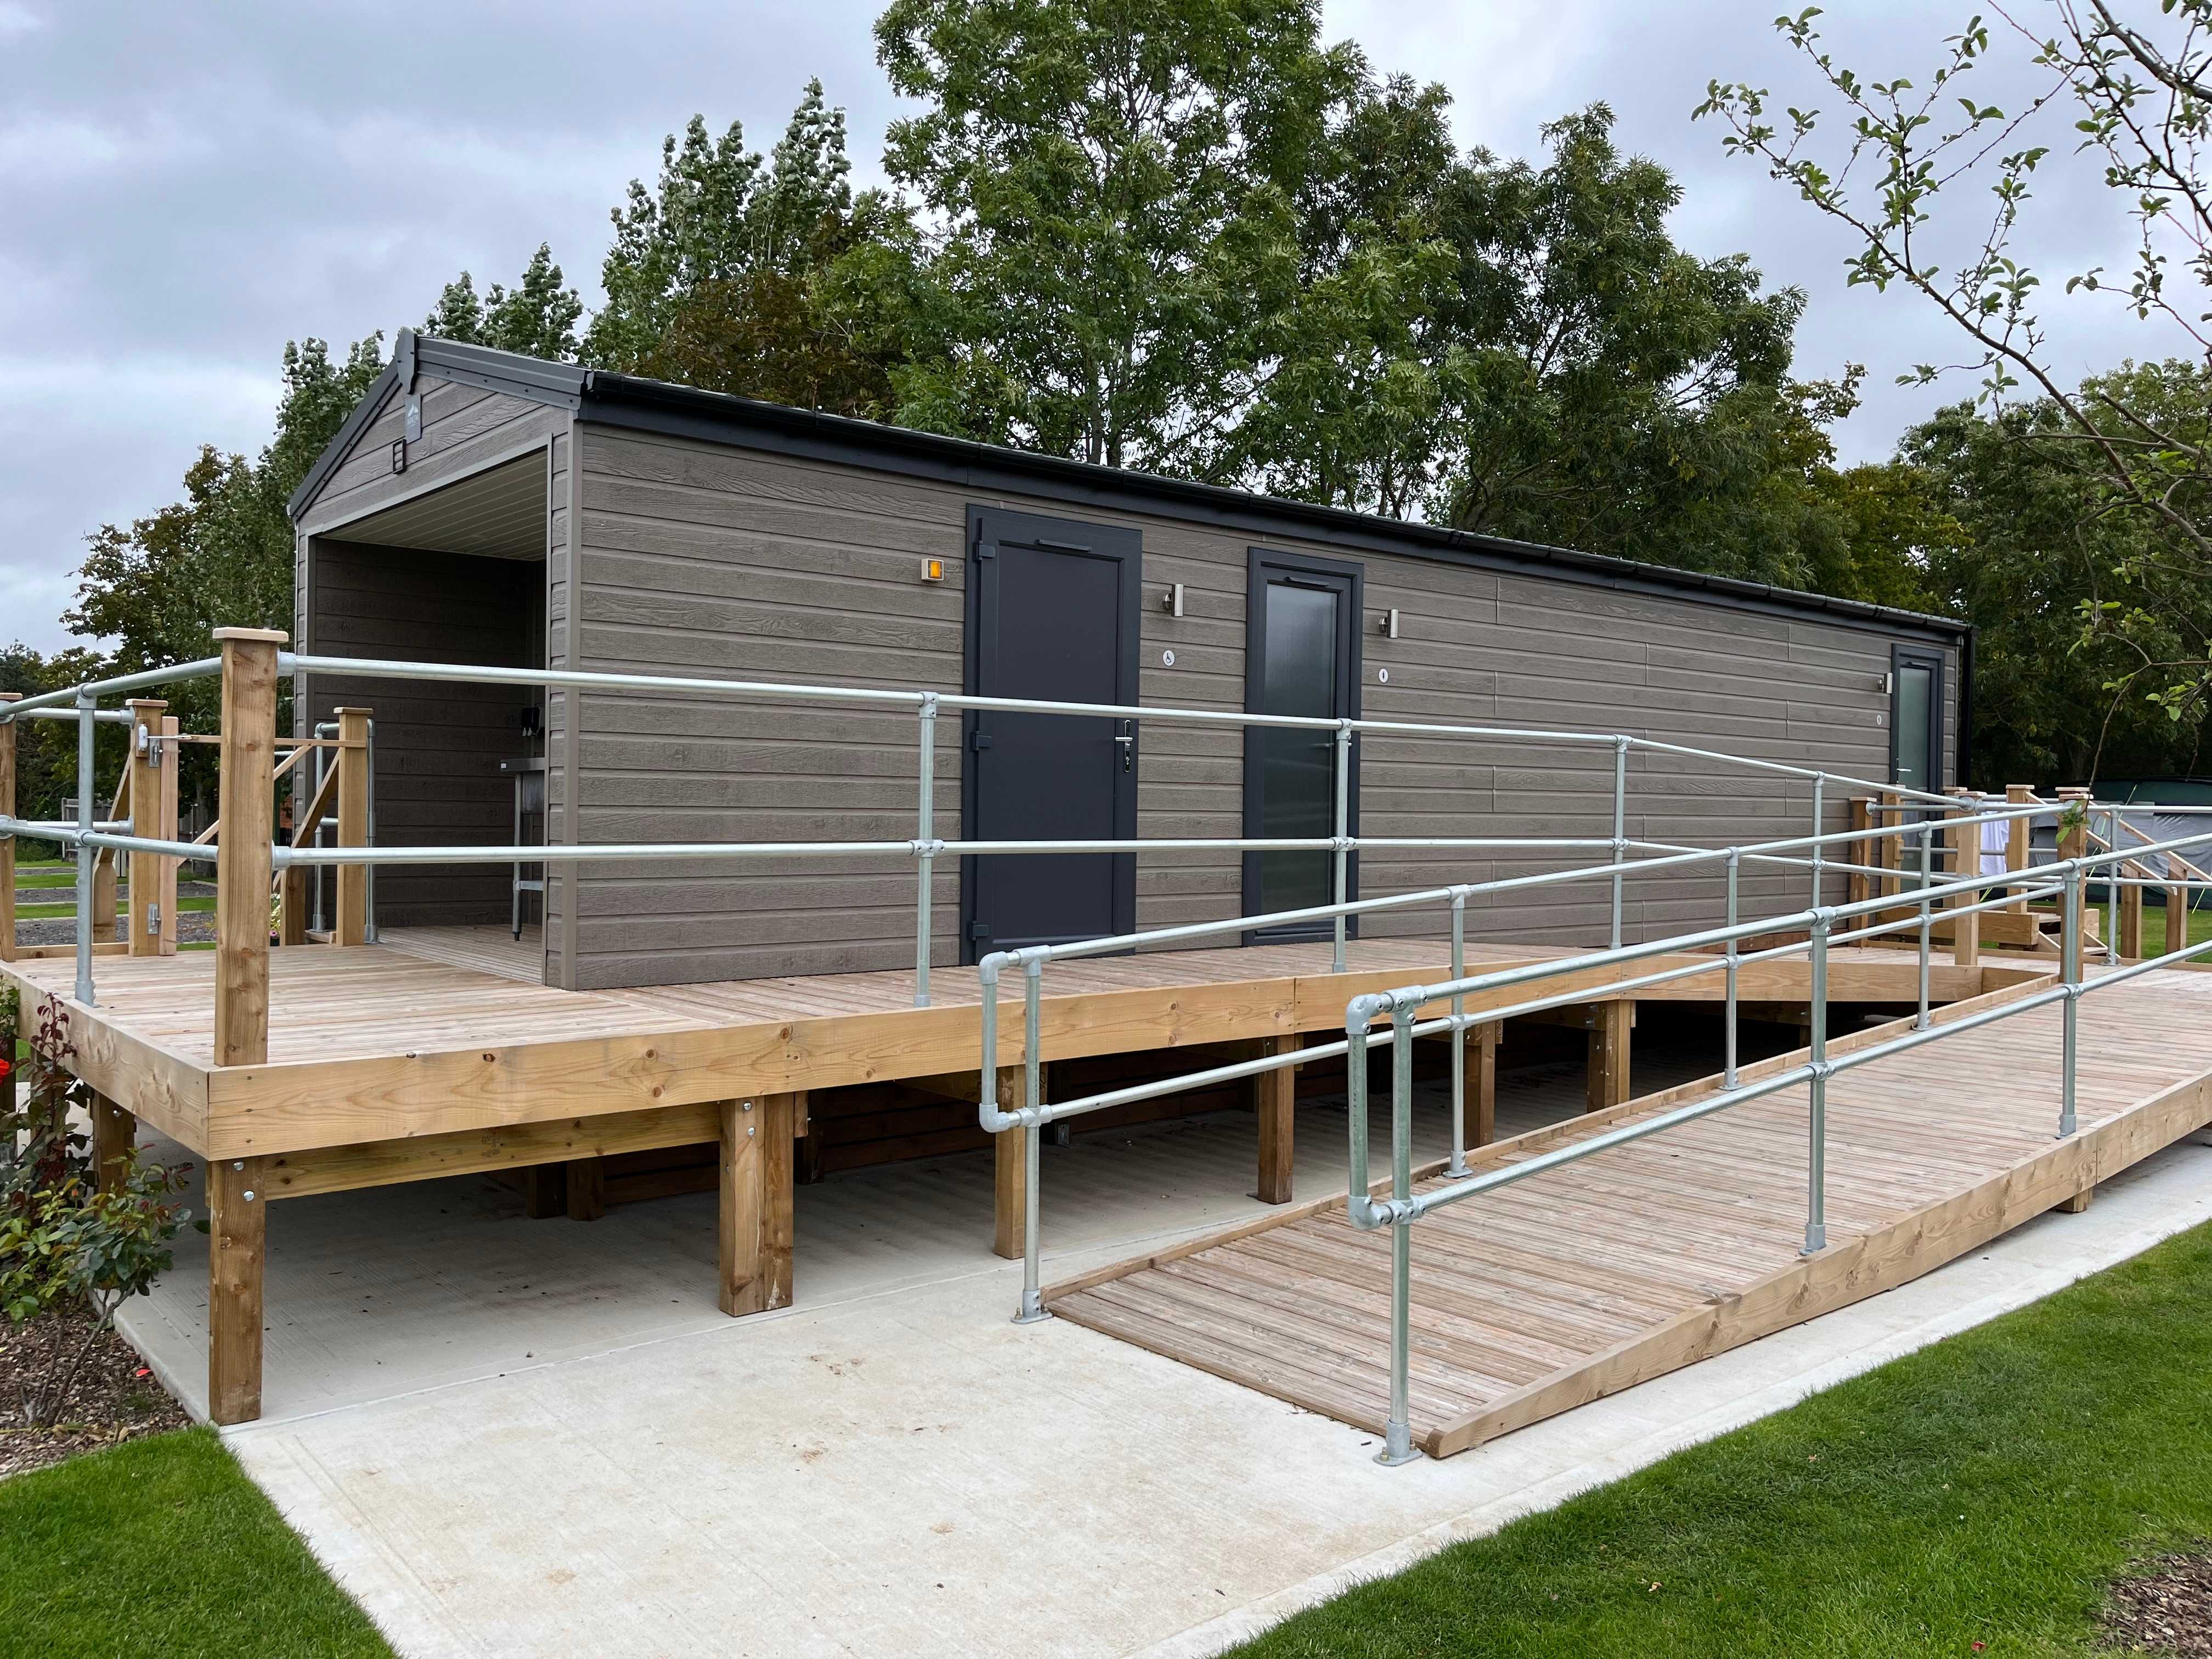 The photo shows a cabin with bathroom and washing facilities, with a wheelchair access ramp leading to the entrance